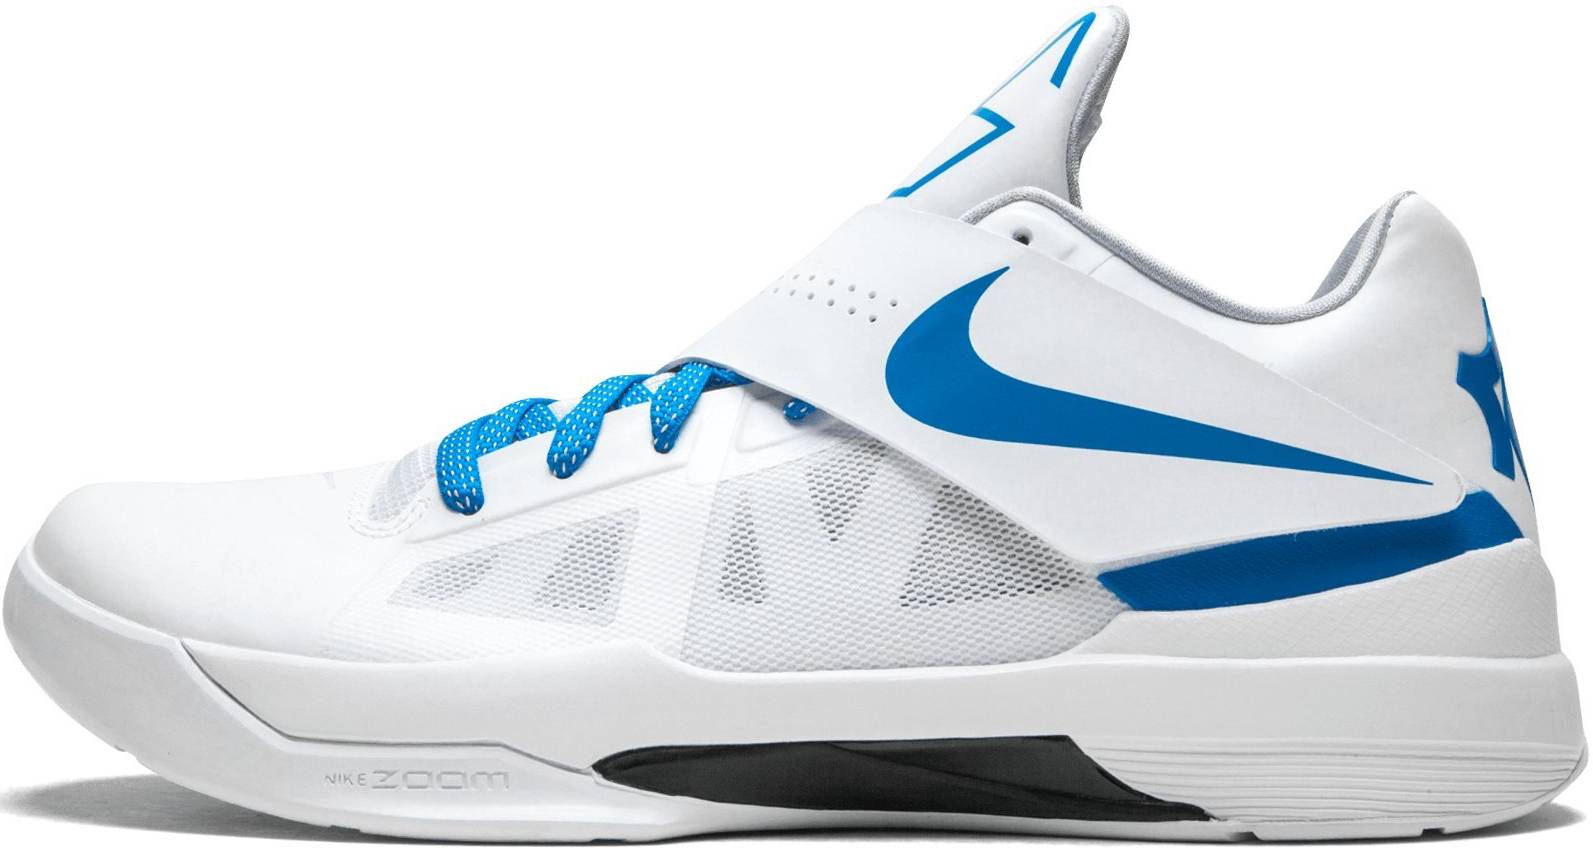 Nike KD 4 - Deals, Facts, Reviews (2021 